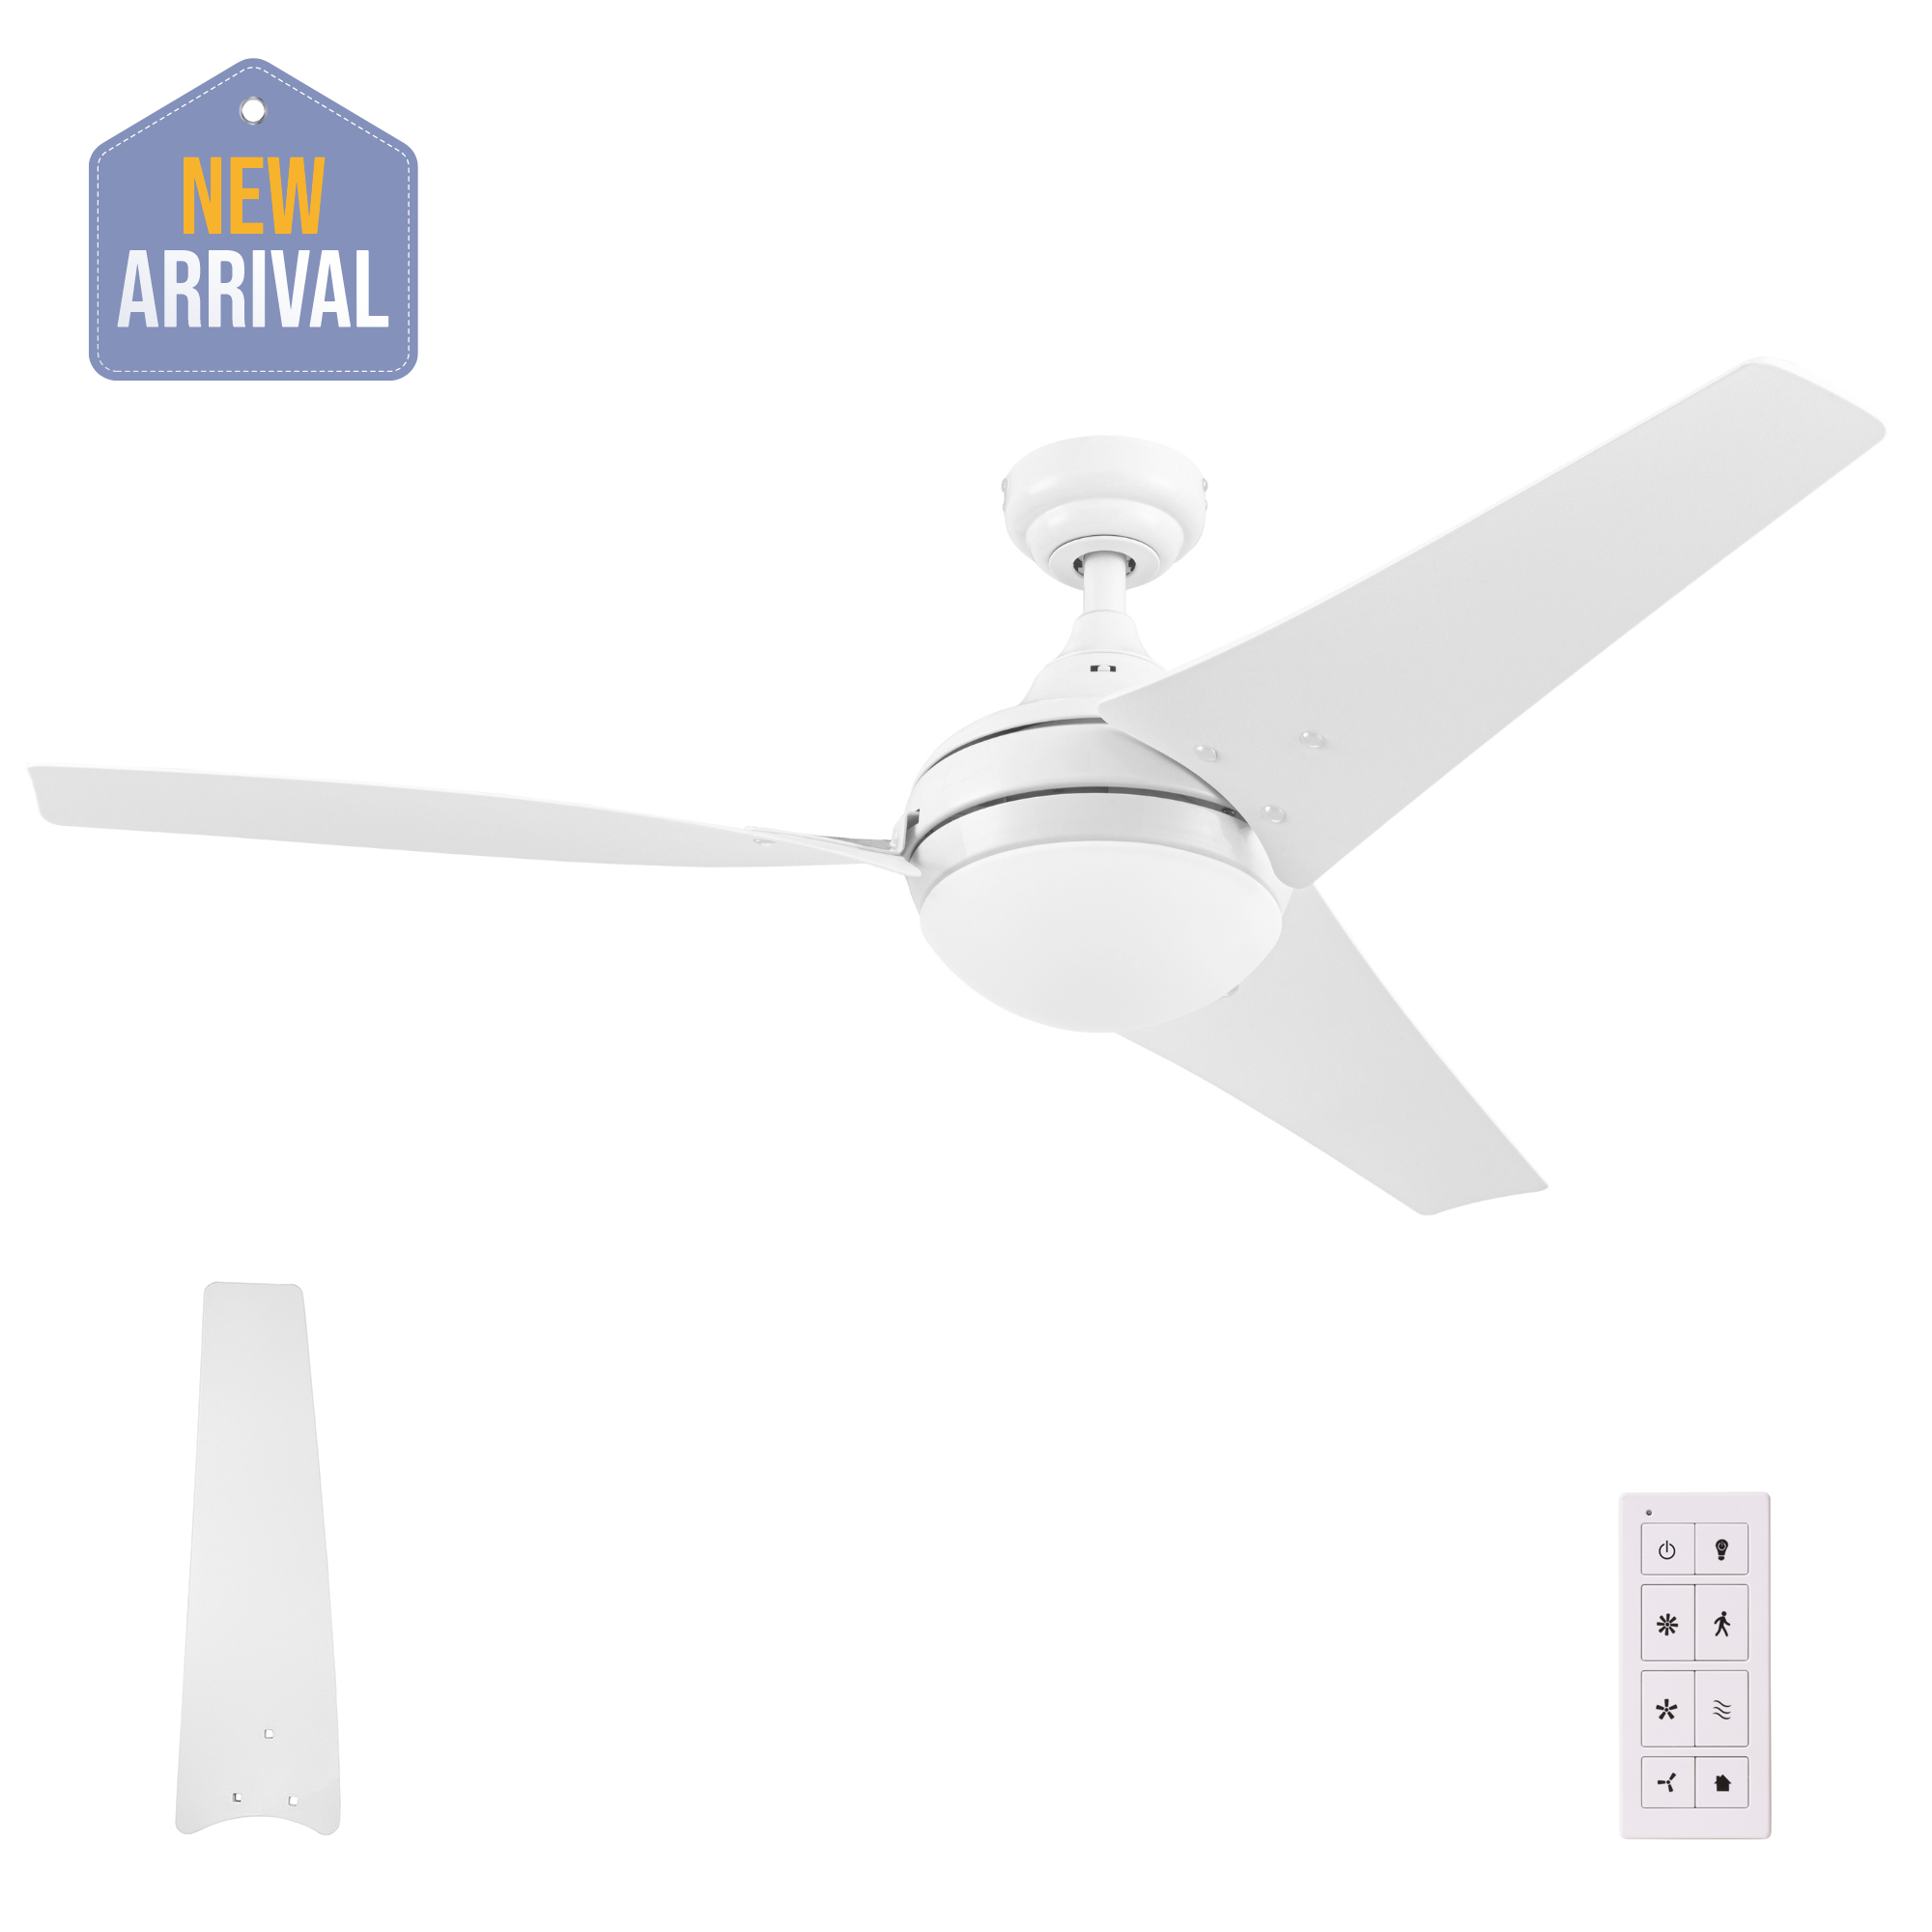 52 Inch Maxon, White, Remote Control, Ceiling Fan by Prominence Home